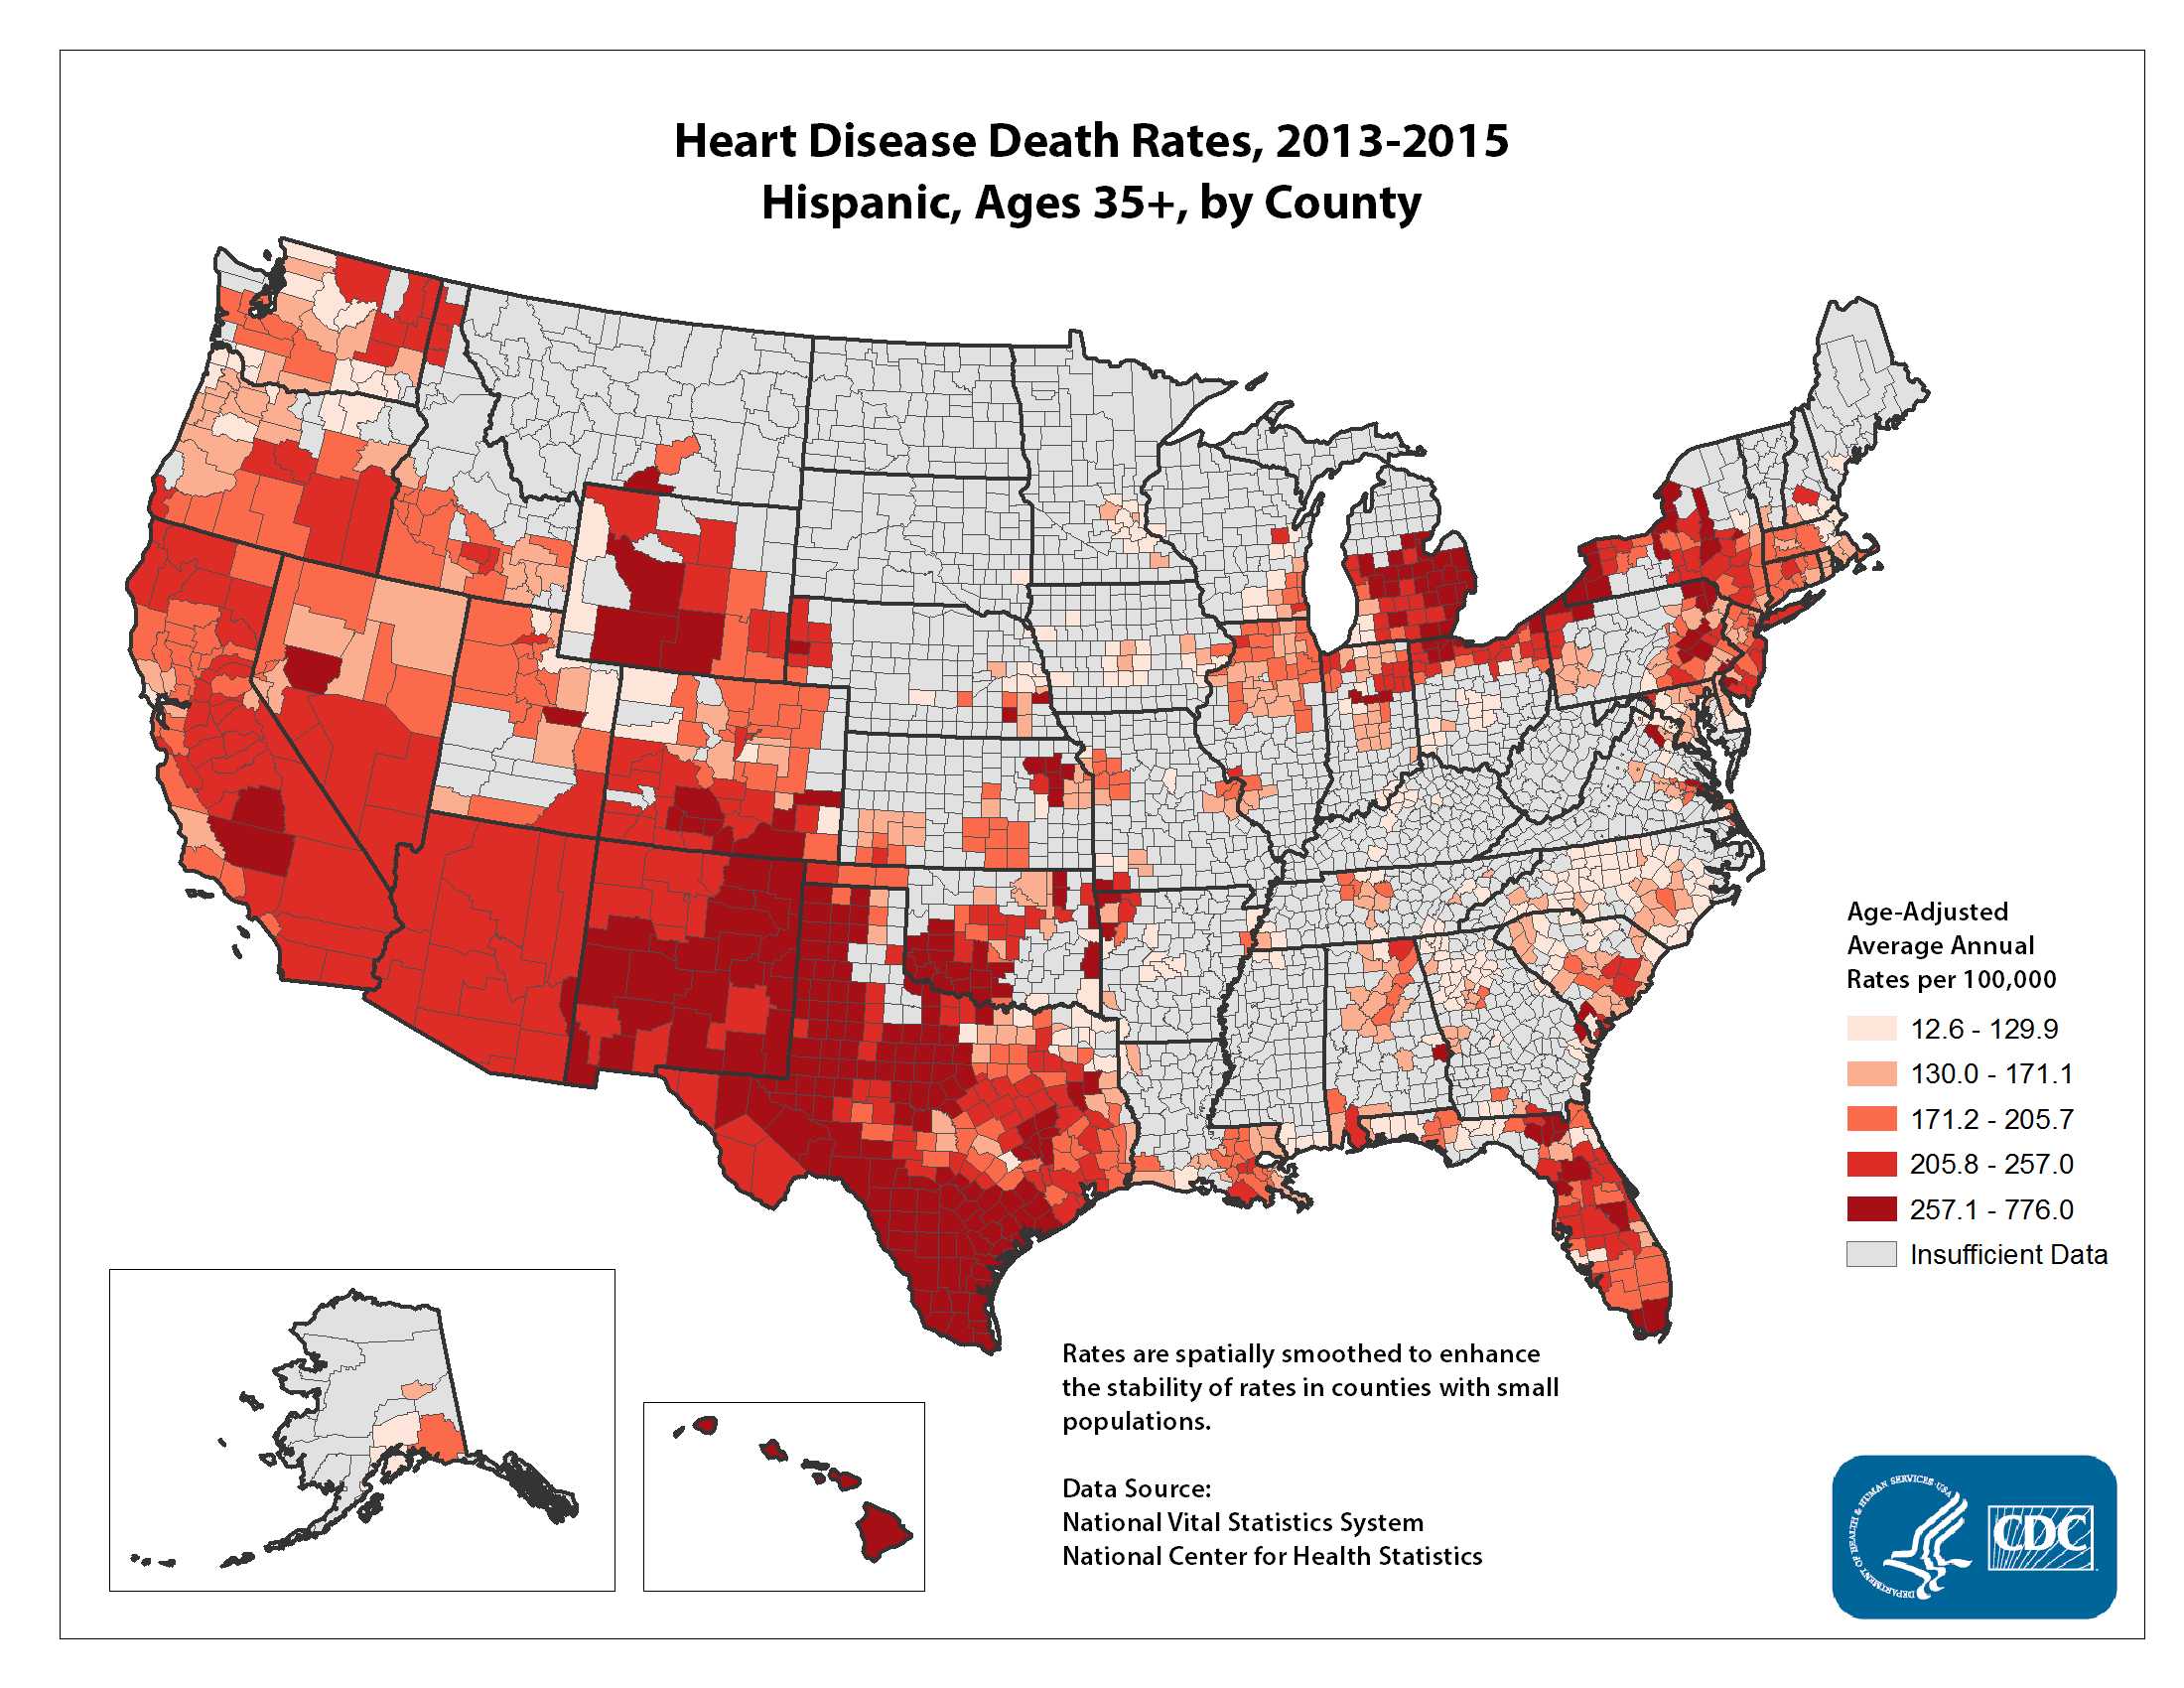 Heart Disease Death Rates for 2012 through 2014 for Hispanics Aged 35 Years and Older by County. The map shows that concentrations of counties with the highest heart disease death rates - meaning the top quintile - are located primarily in Hawaii, Texas, and New Mexico.  Pockets of high-rate counties also were found in parts of Wyoming, Michigan, New York, and California.